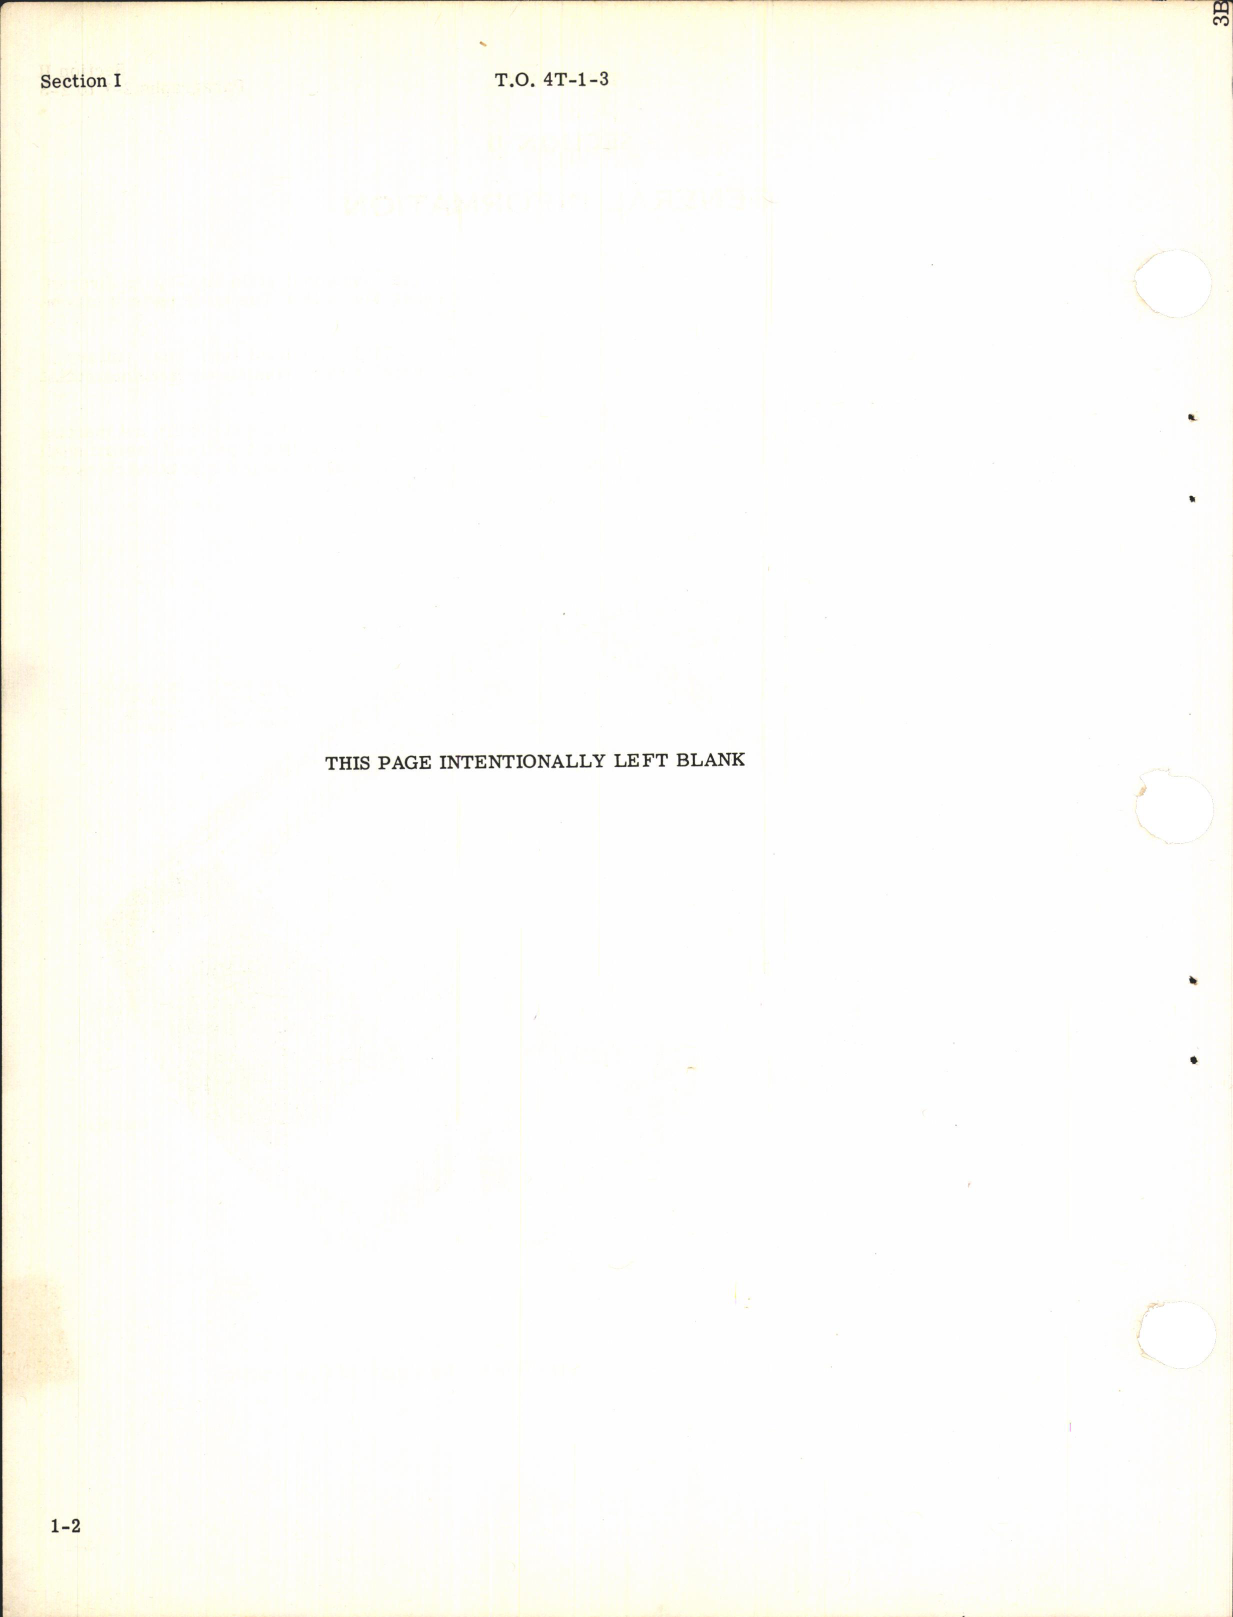 Sample page 6 from AirCorps Library document: Inspection, Maintenance, Storage, and Disposition of Aircraft Tire Casings and Inner Tubes